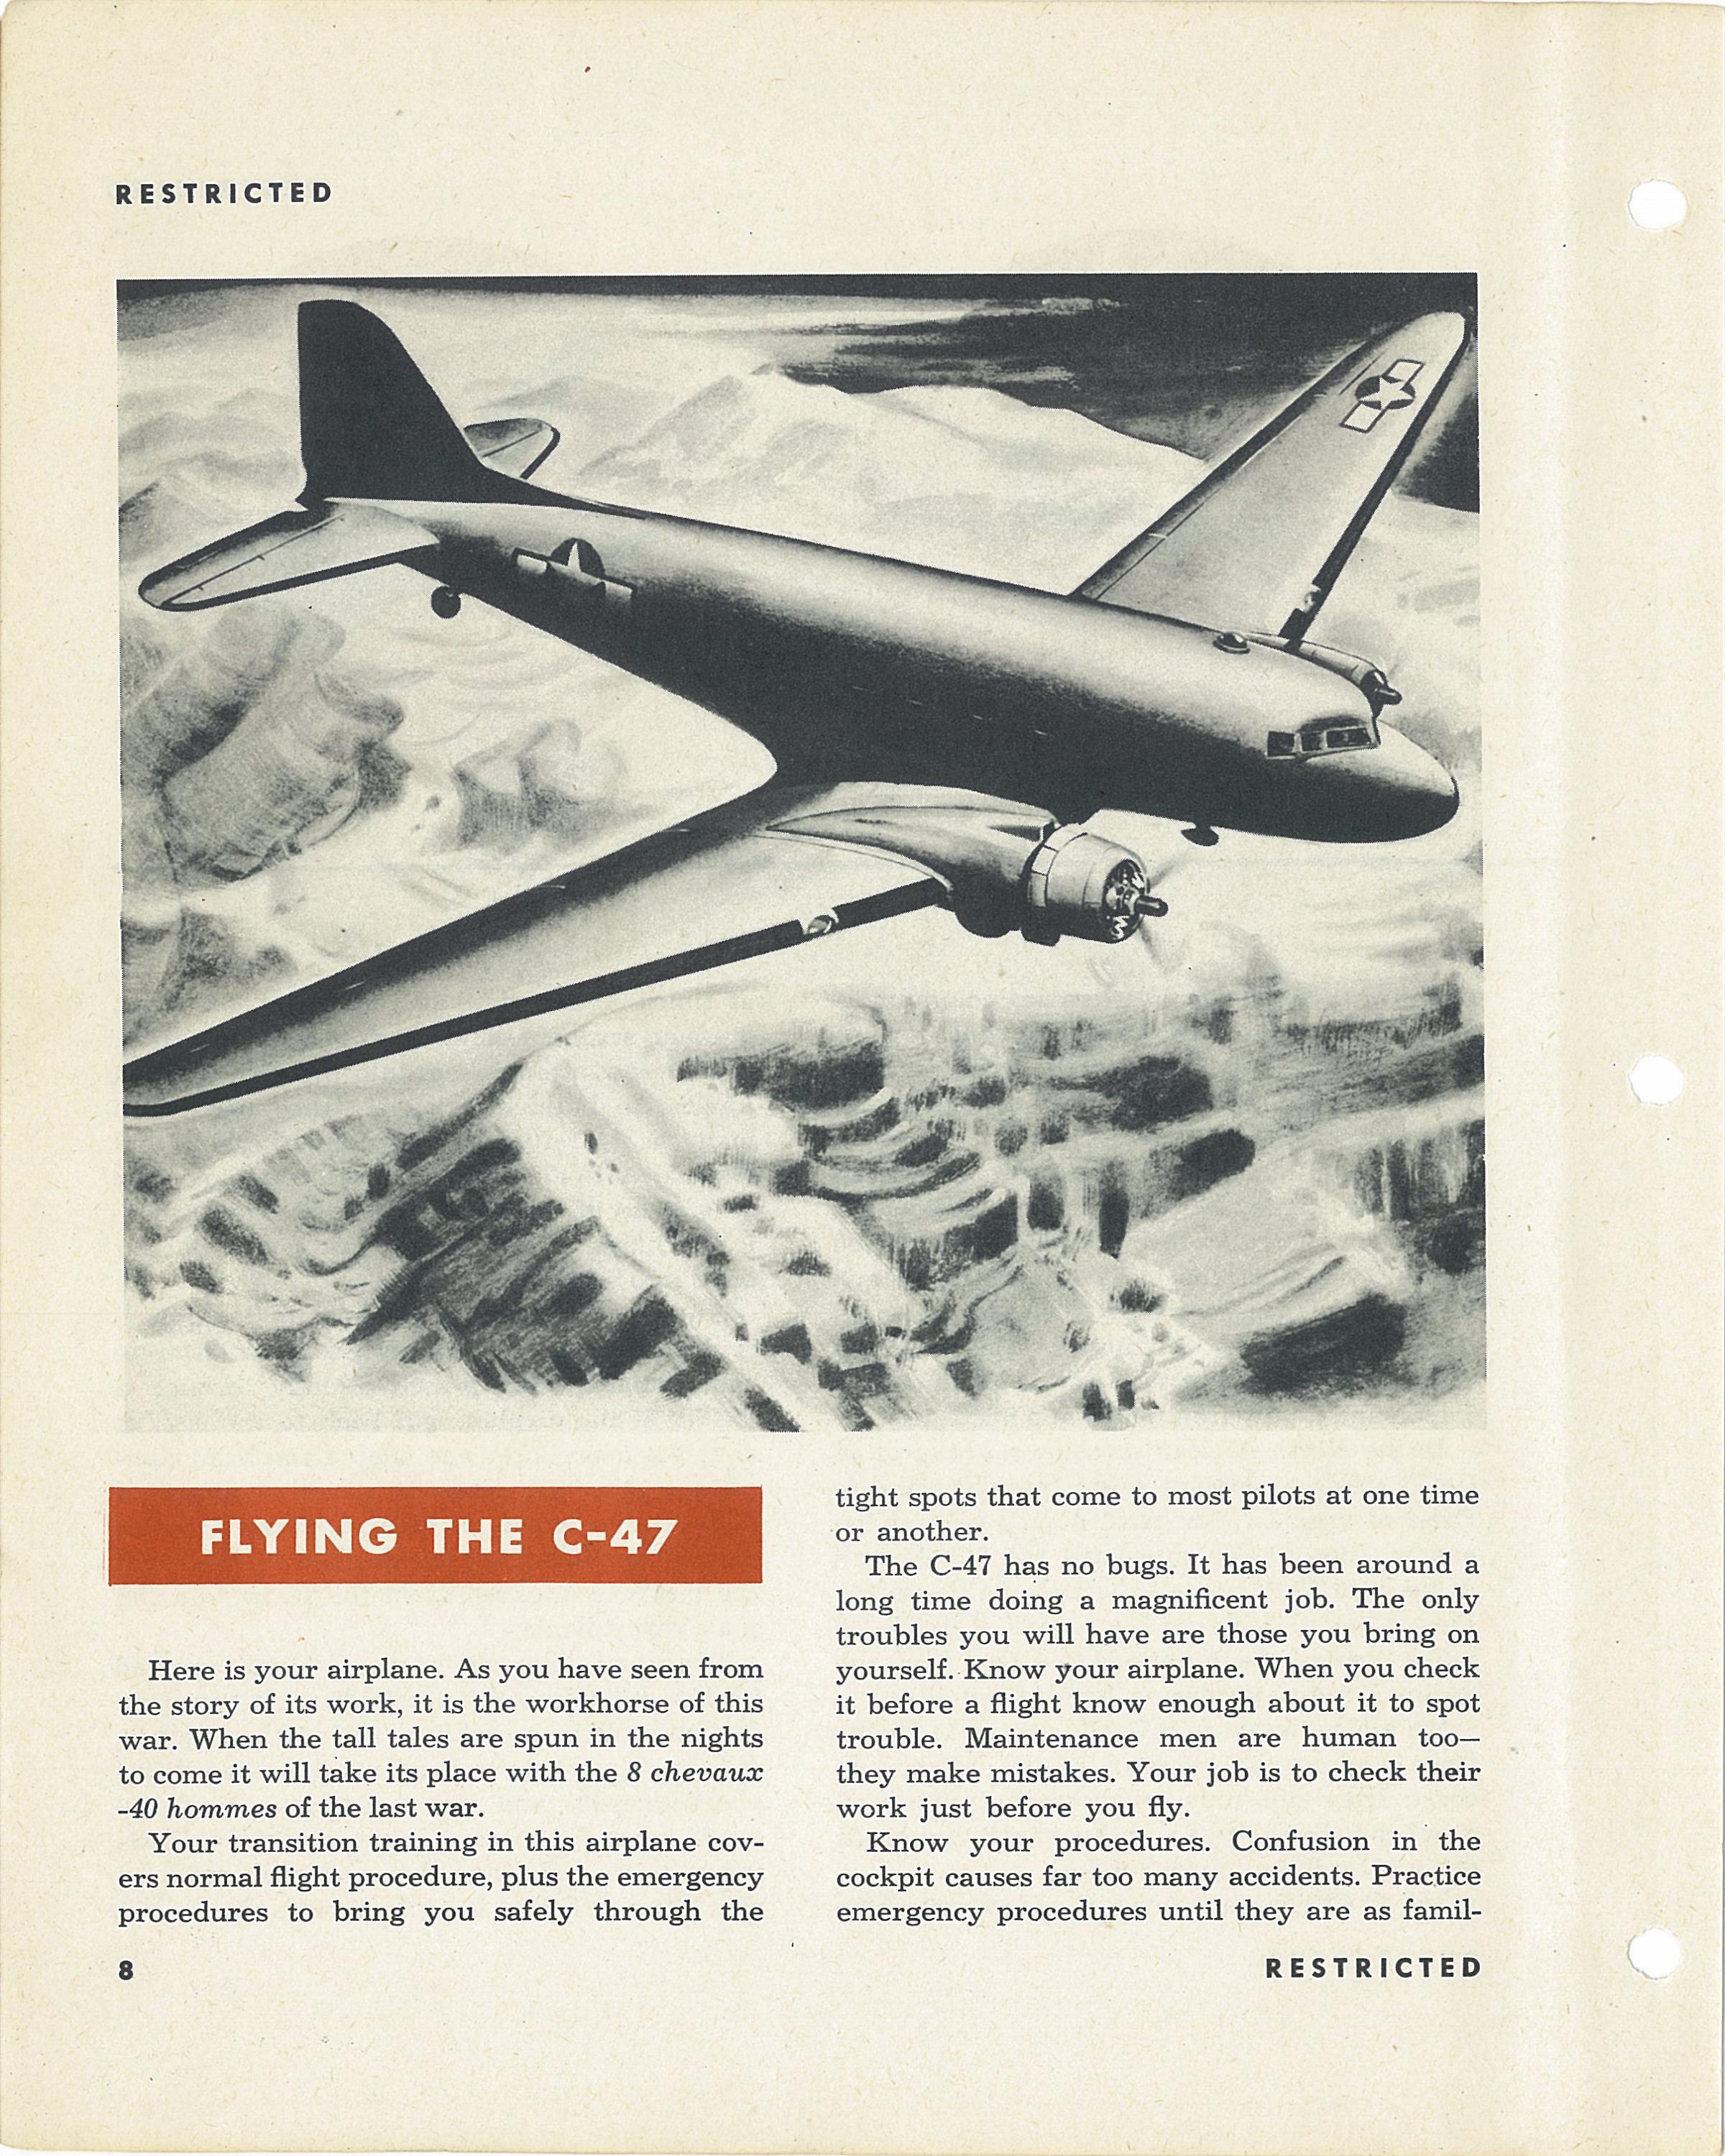 Sample page 10 from AirCorps Library document: Pilot Training Manual for the C-47 Skytrain